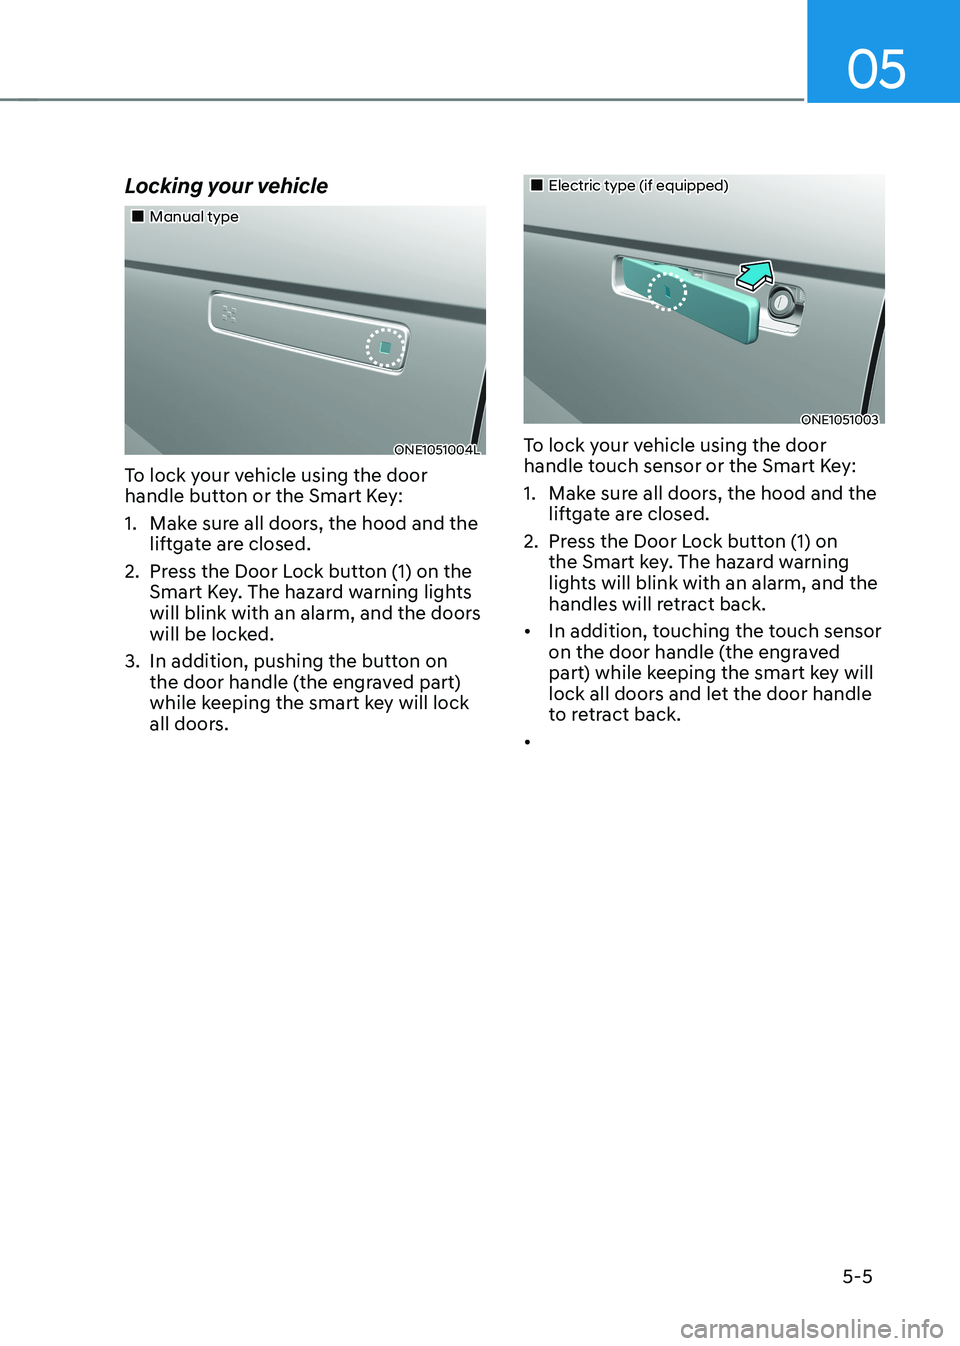 HYUNDAI IONIQ 5 2023  Owners Manual 05
5-5
Locking your vehicle
„„Manual type
ONE1051004L
To lock your vehicle using the door  
handle button or the Smart Key: 
1.  Make sure all doors, the hood and the  liftgate are closed.
2